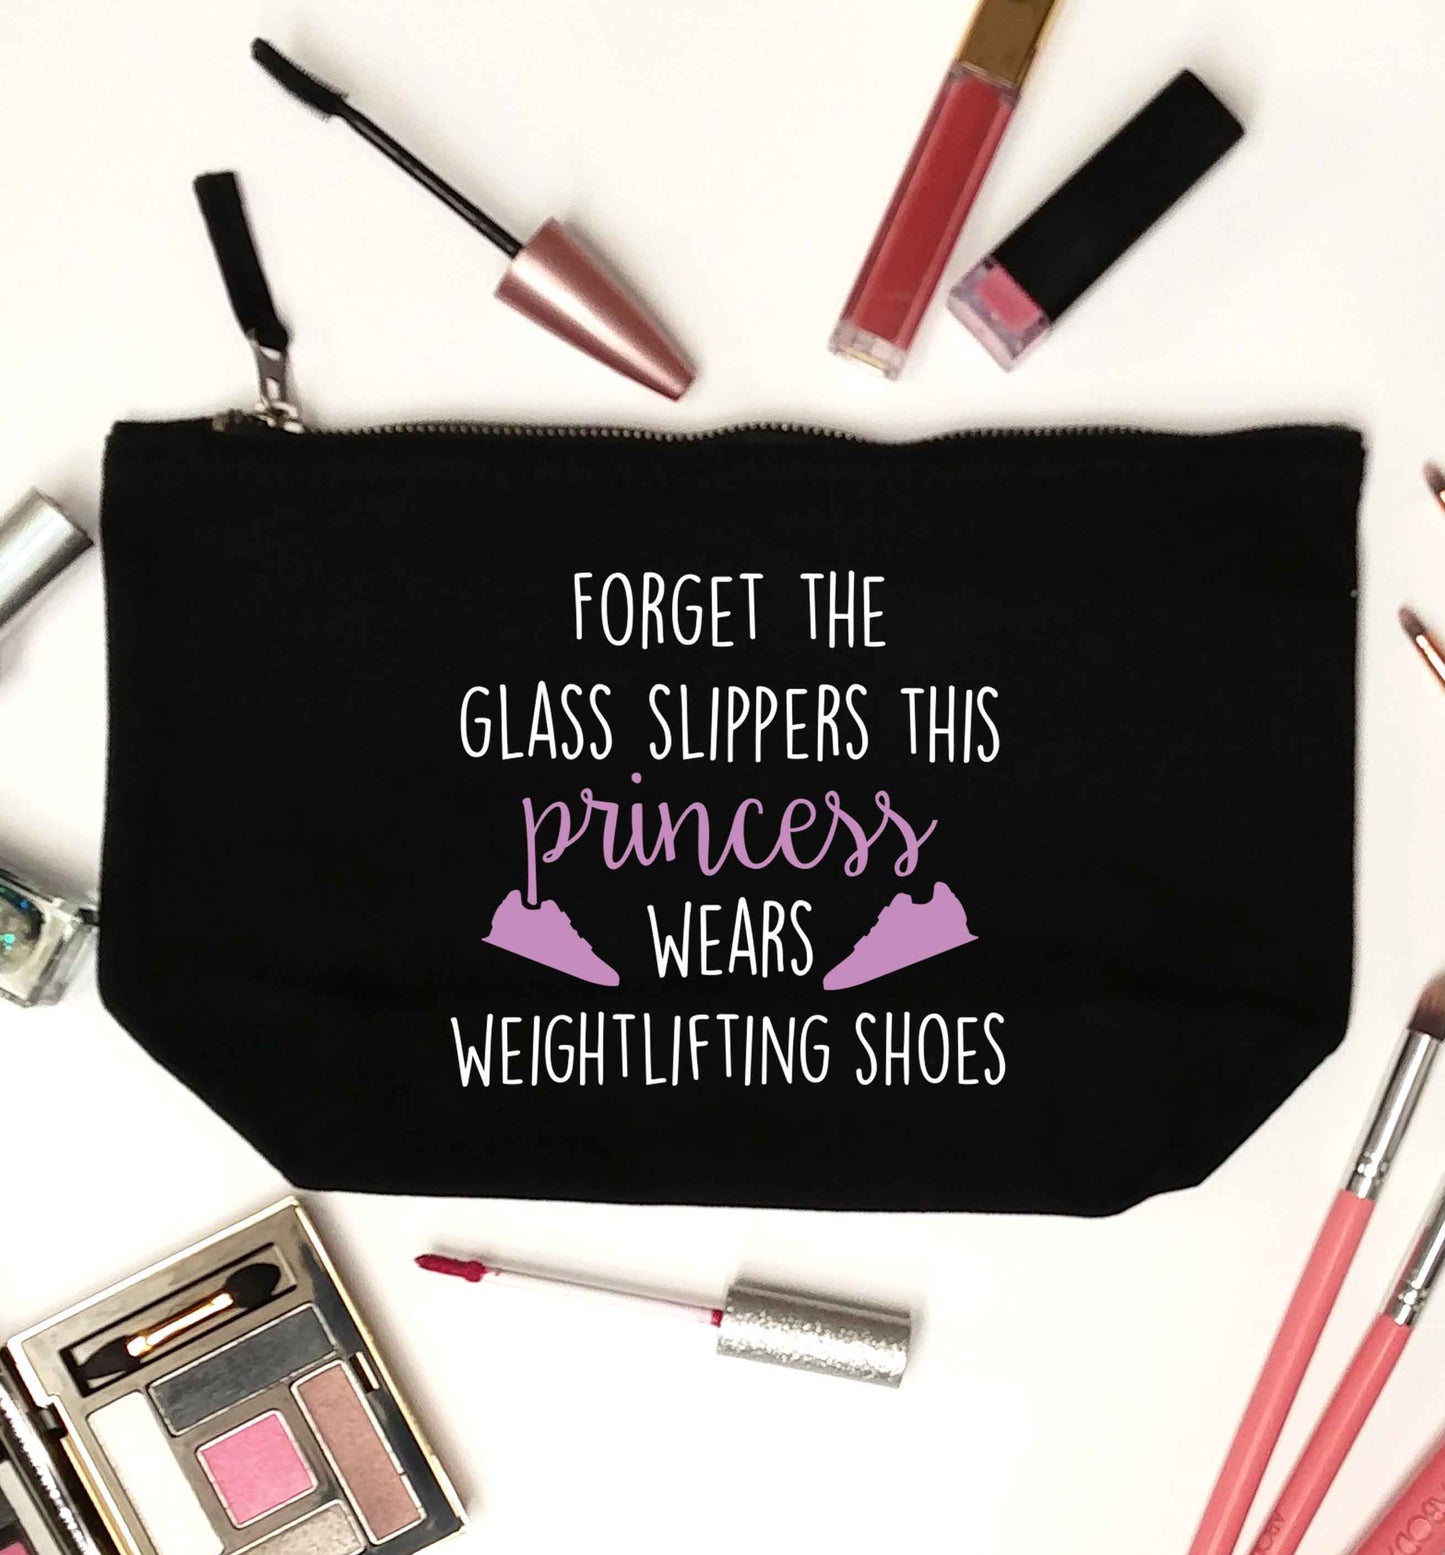 Forget the glass slippers this princess wears weightlifting shoes black makeup bag